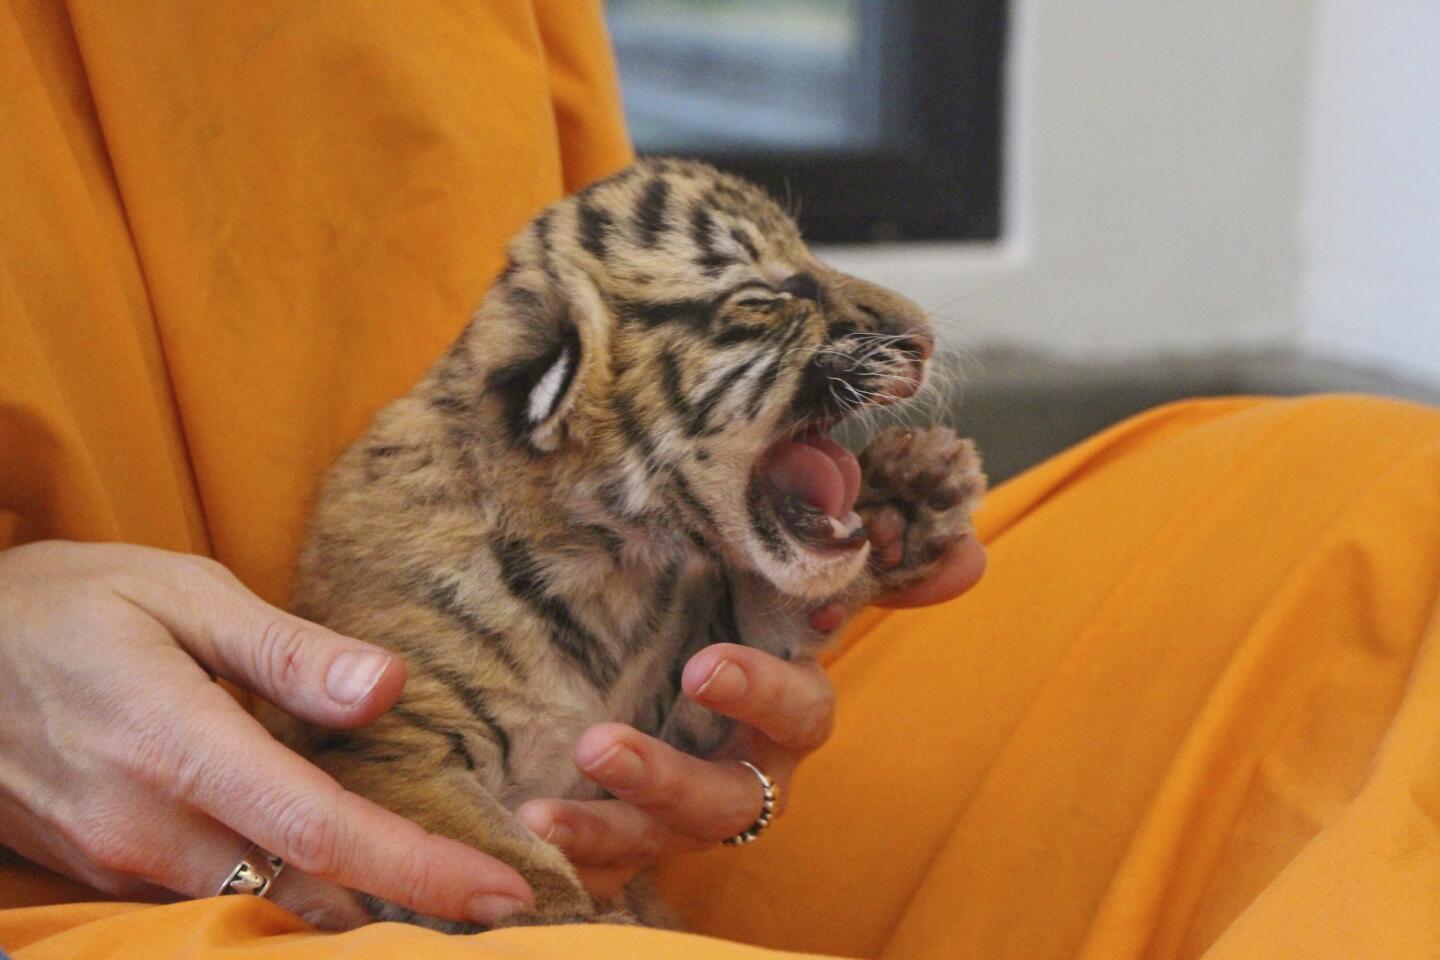 Cincinnati Zoo & Botanical Garden keeper Amanda Weisel holds a newborn Malayan tiger cub in the zoo's nursery in Cincinnati on Feb. 7, 2017. A Malayan tiger named Cinta gave birth to three cubs Feb. 3, 2017, and zoo officials say that because the first-time mother's maternal instincts didn't kick in, employees in the zoo's nursery will keep the cubs warm and feed them before they are placed in an outdoor habitat.